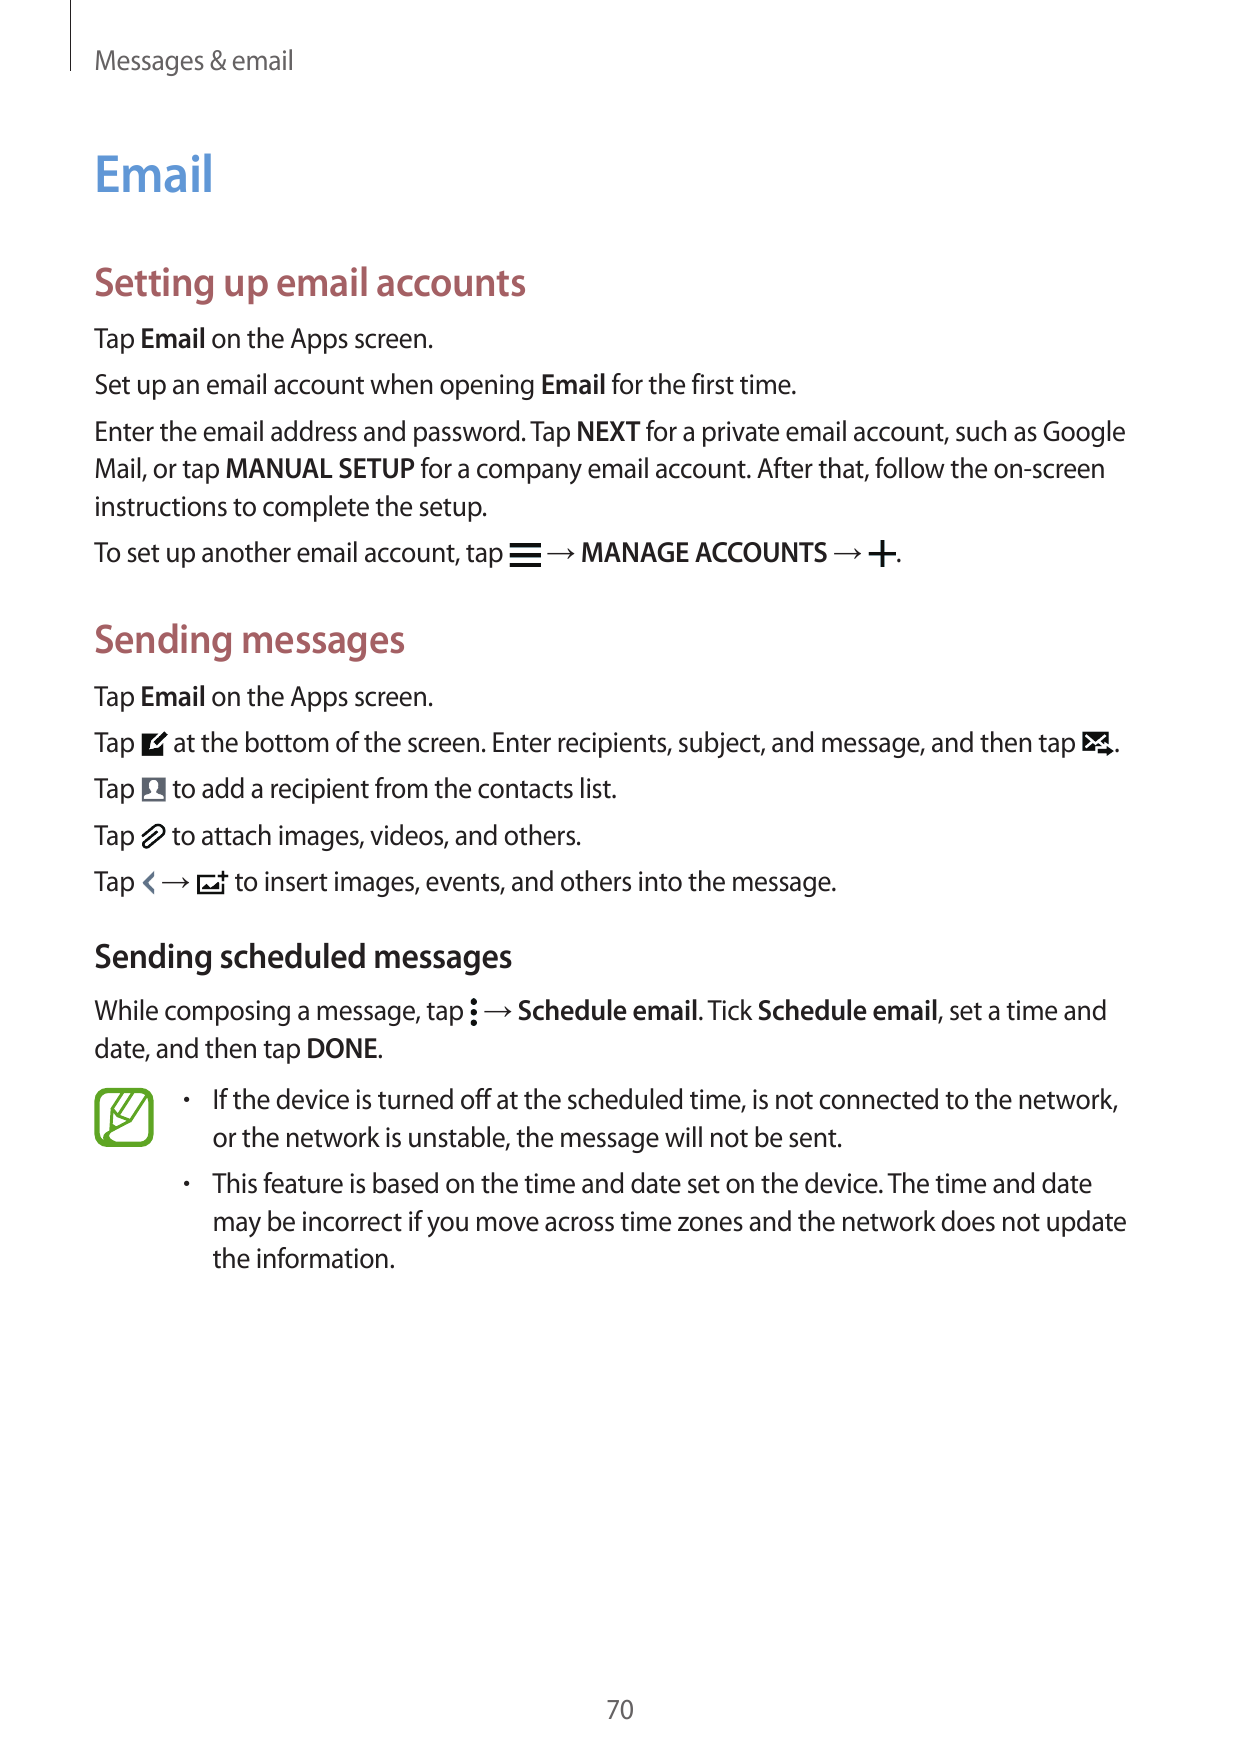 Messages & emailEmailSetting up email accountsTap Email on the Apps screen.Set up an email account when opening Email for the fi